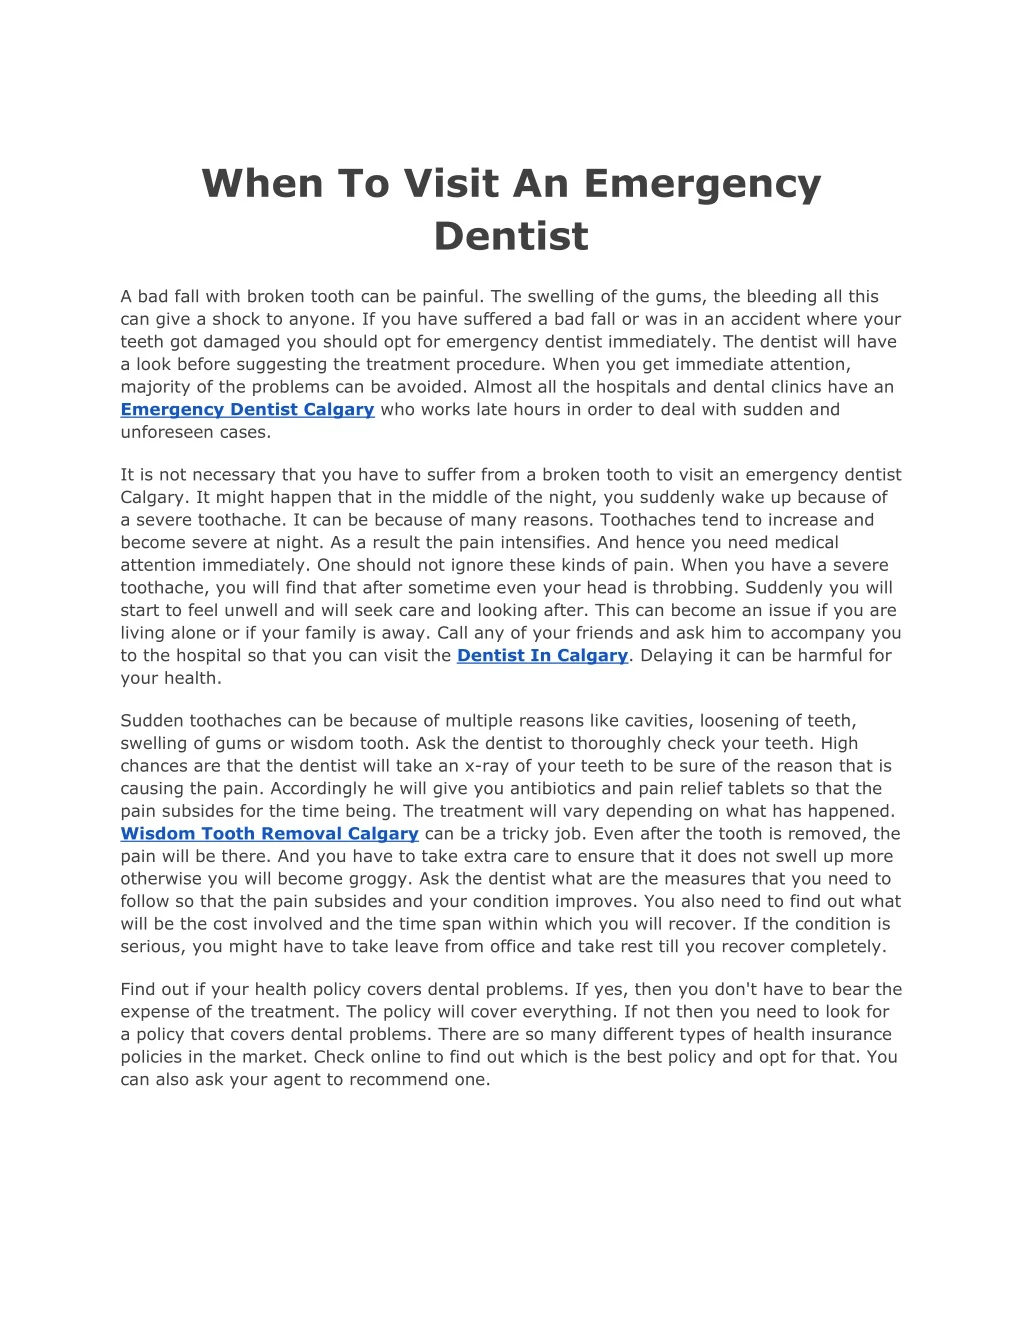 when to visit an emergency dentist